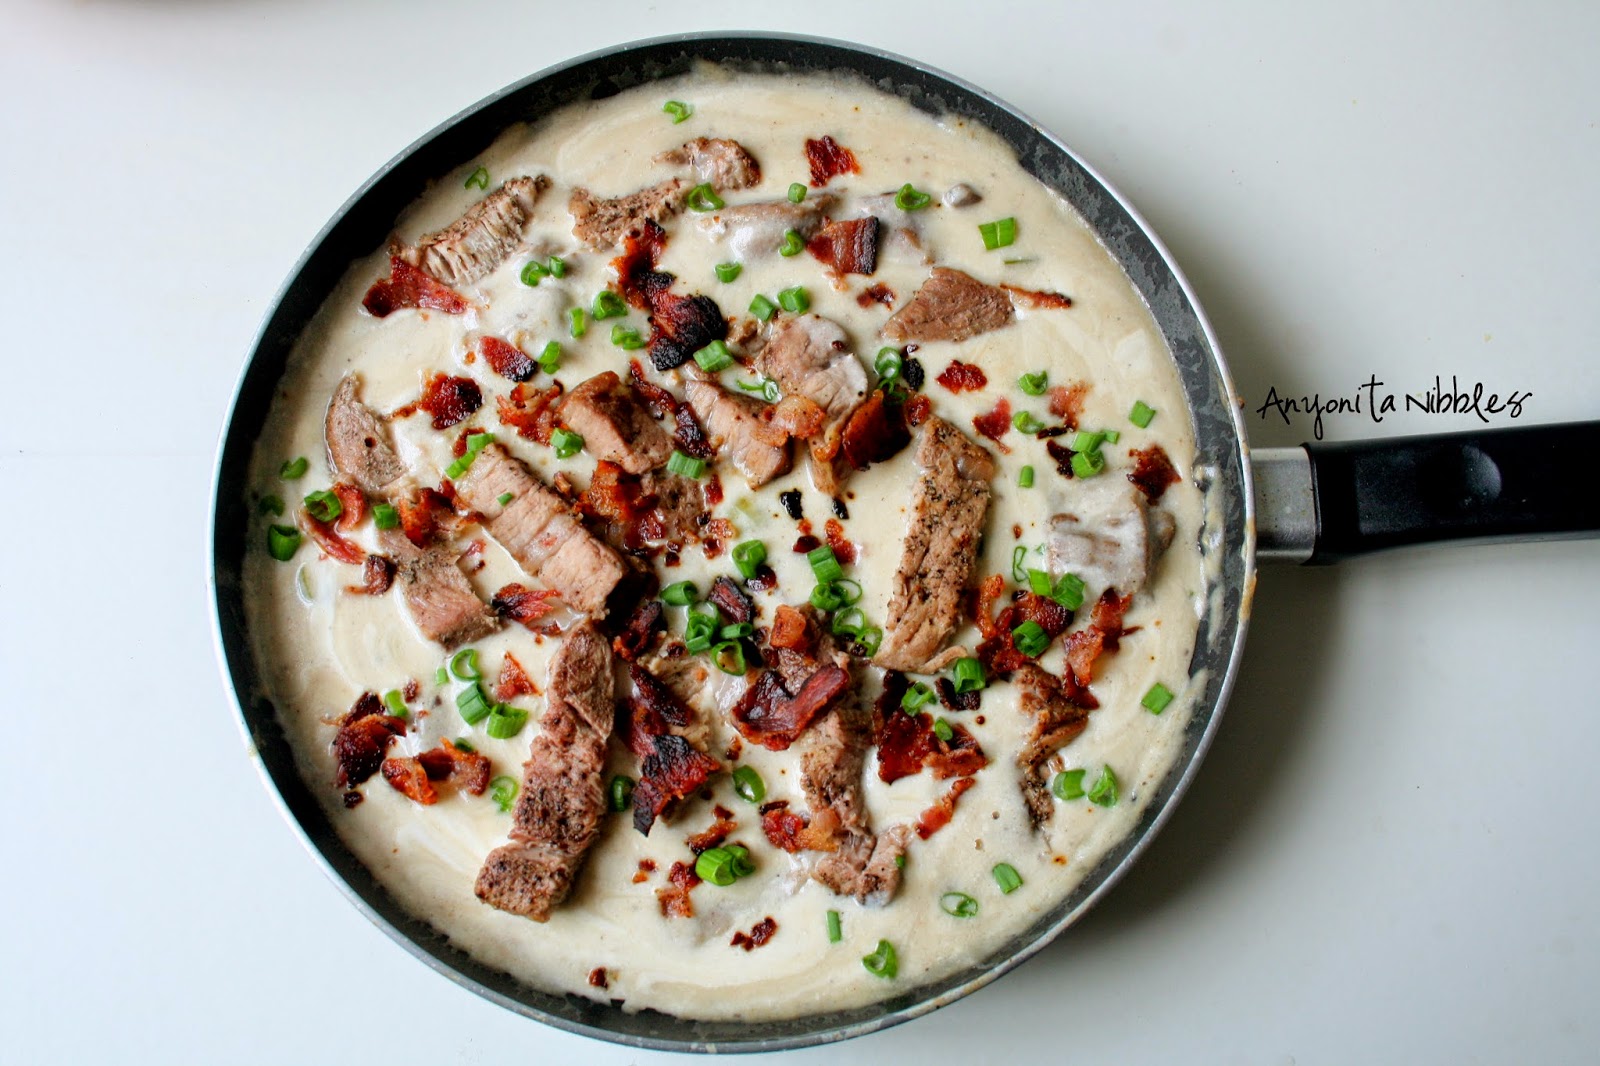 This gluten free, creamy pork shop skillet soup is light and indulgent.